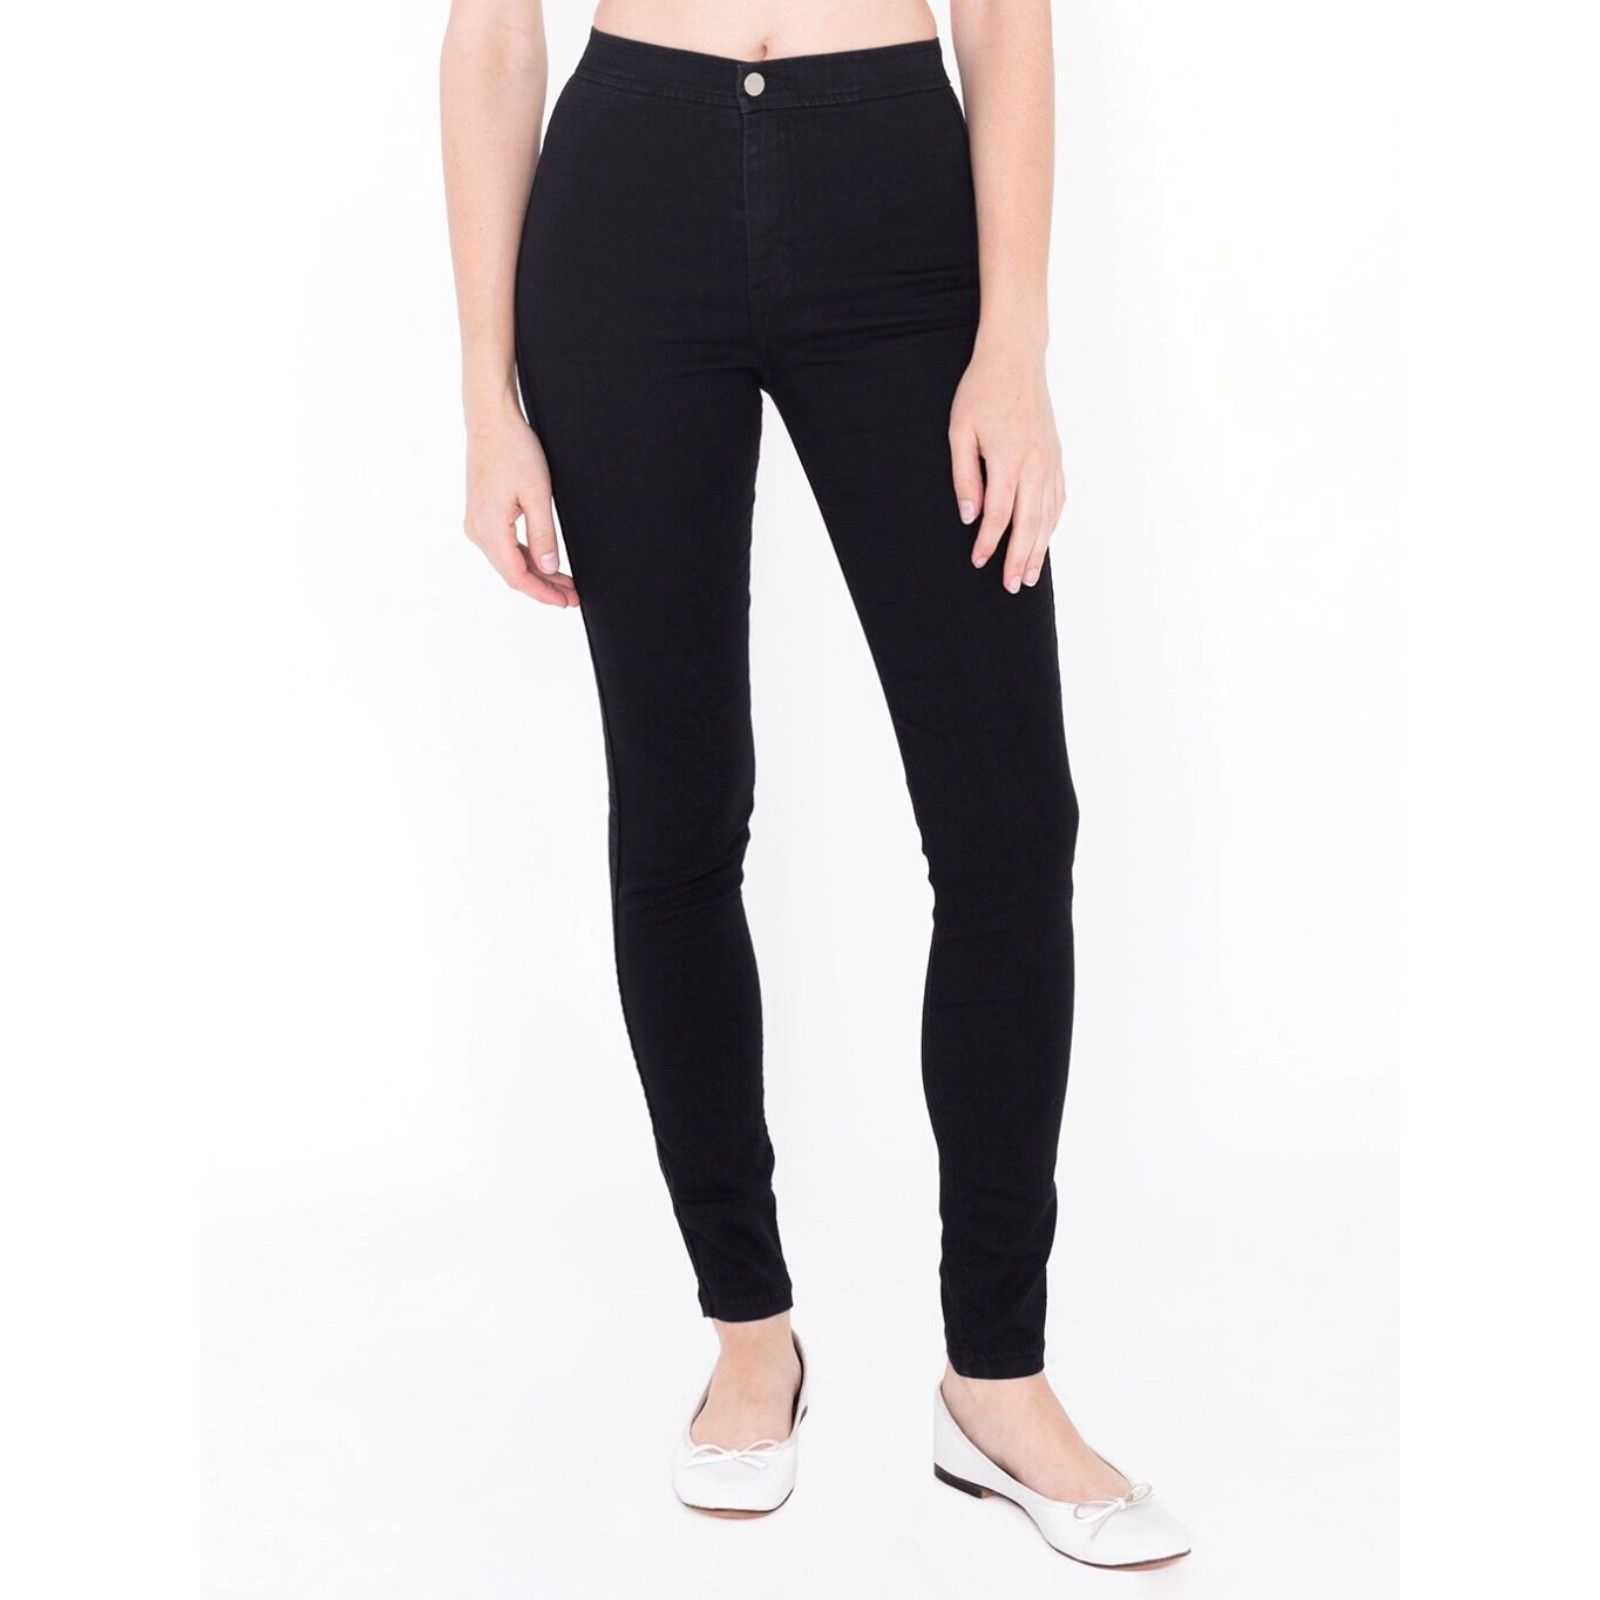 American Apparel american apparel easy jeans black NWT womens XXS deadstock original version dov Size ONE SIZE - 1 Preview